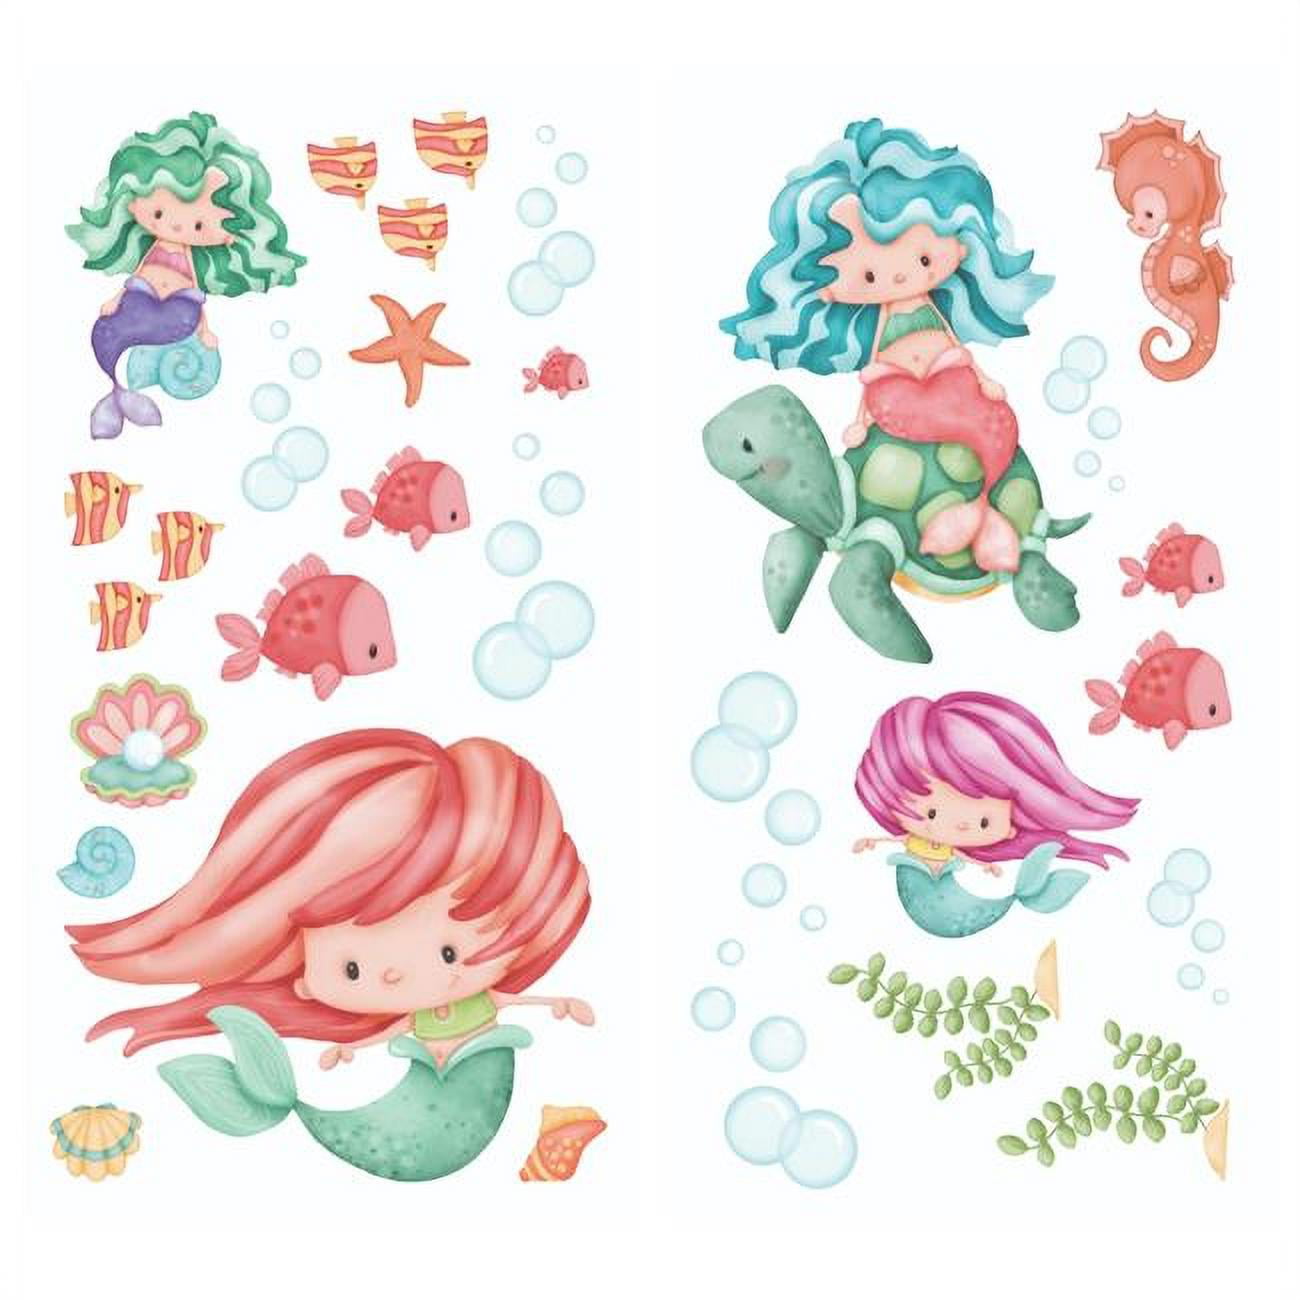 10025 Magical Mermaids Applique Wall Decal Stickers, Multi Color - Super Jumbo